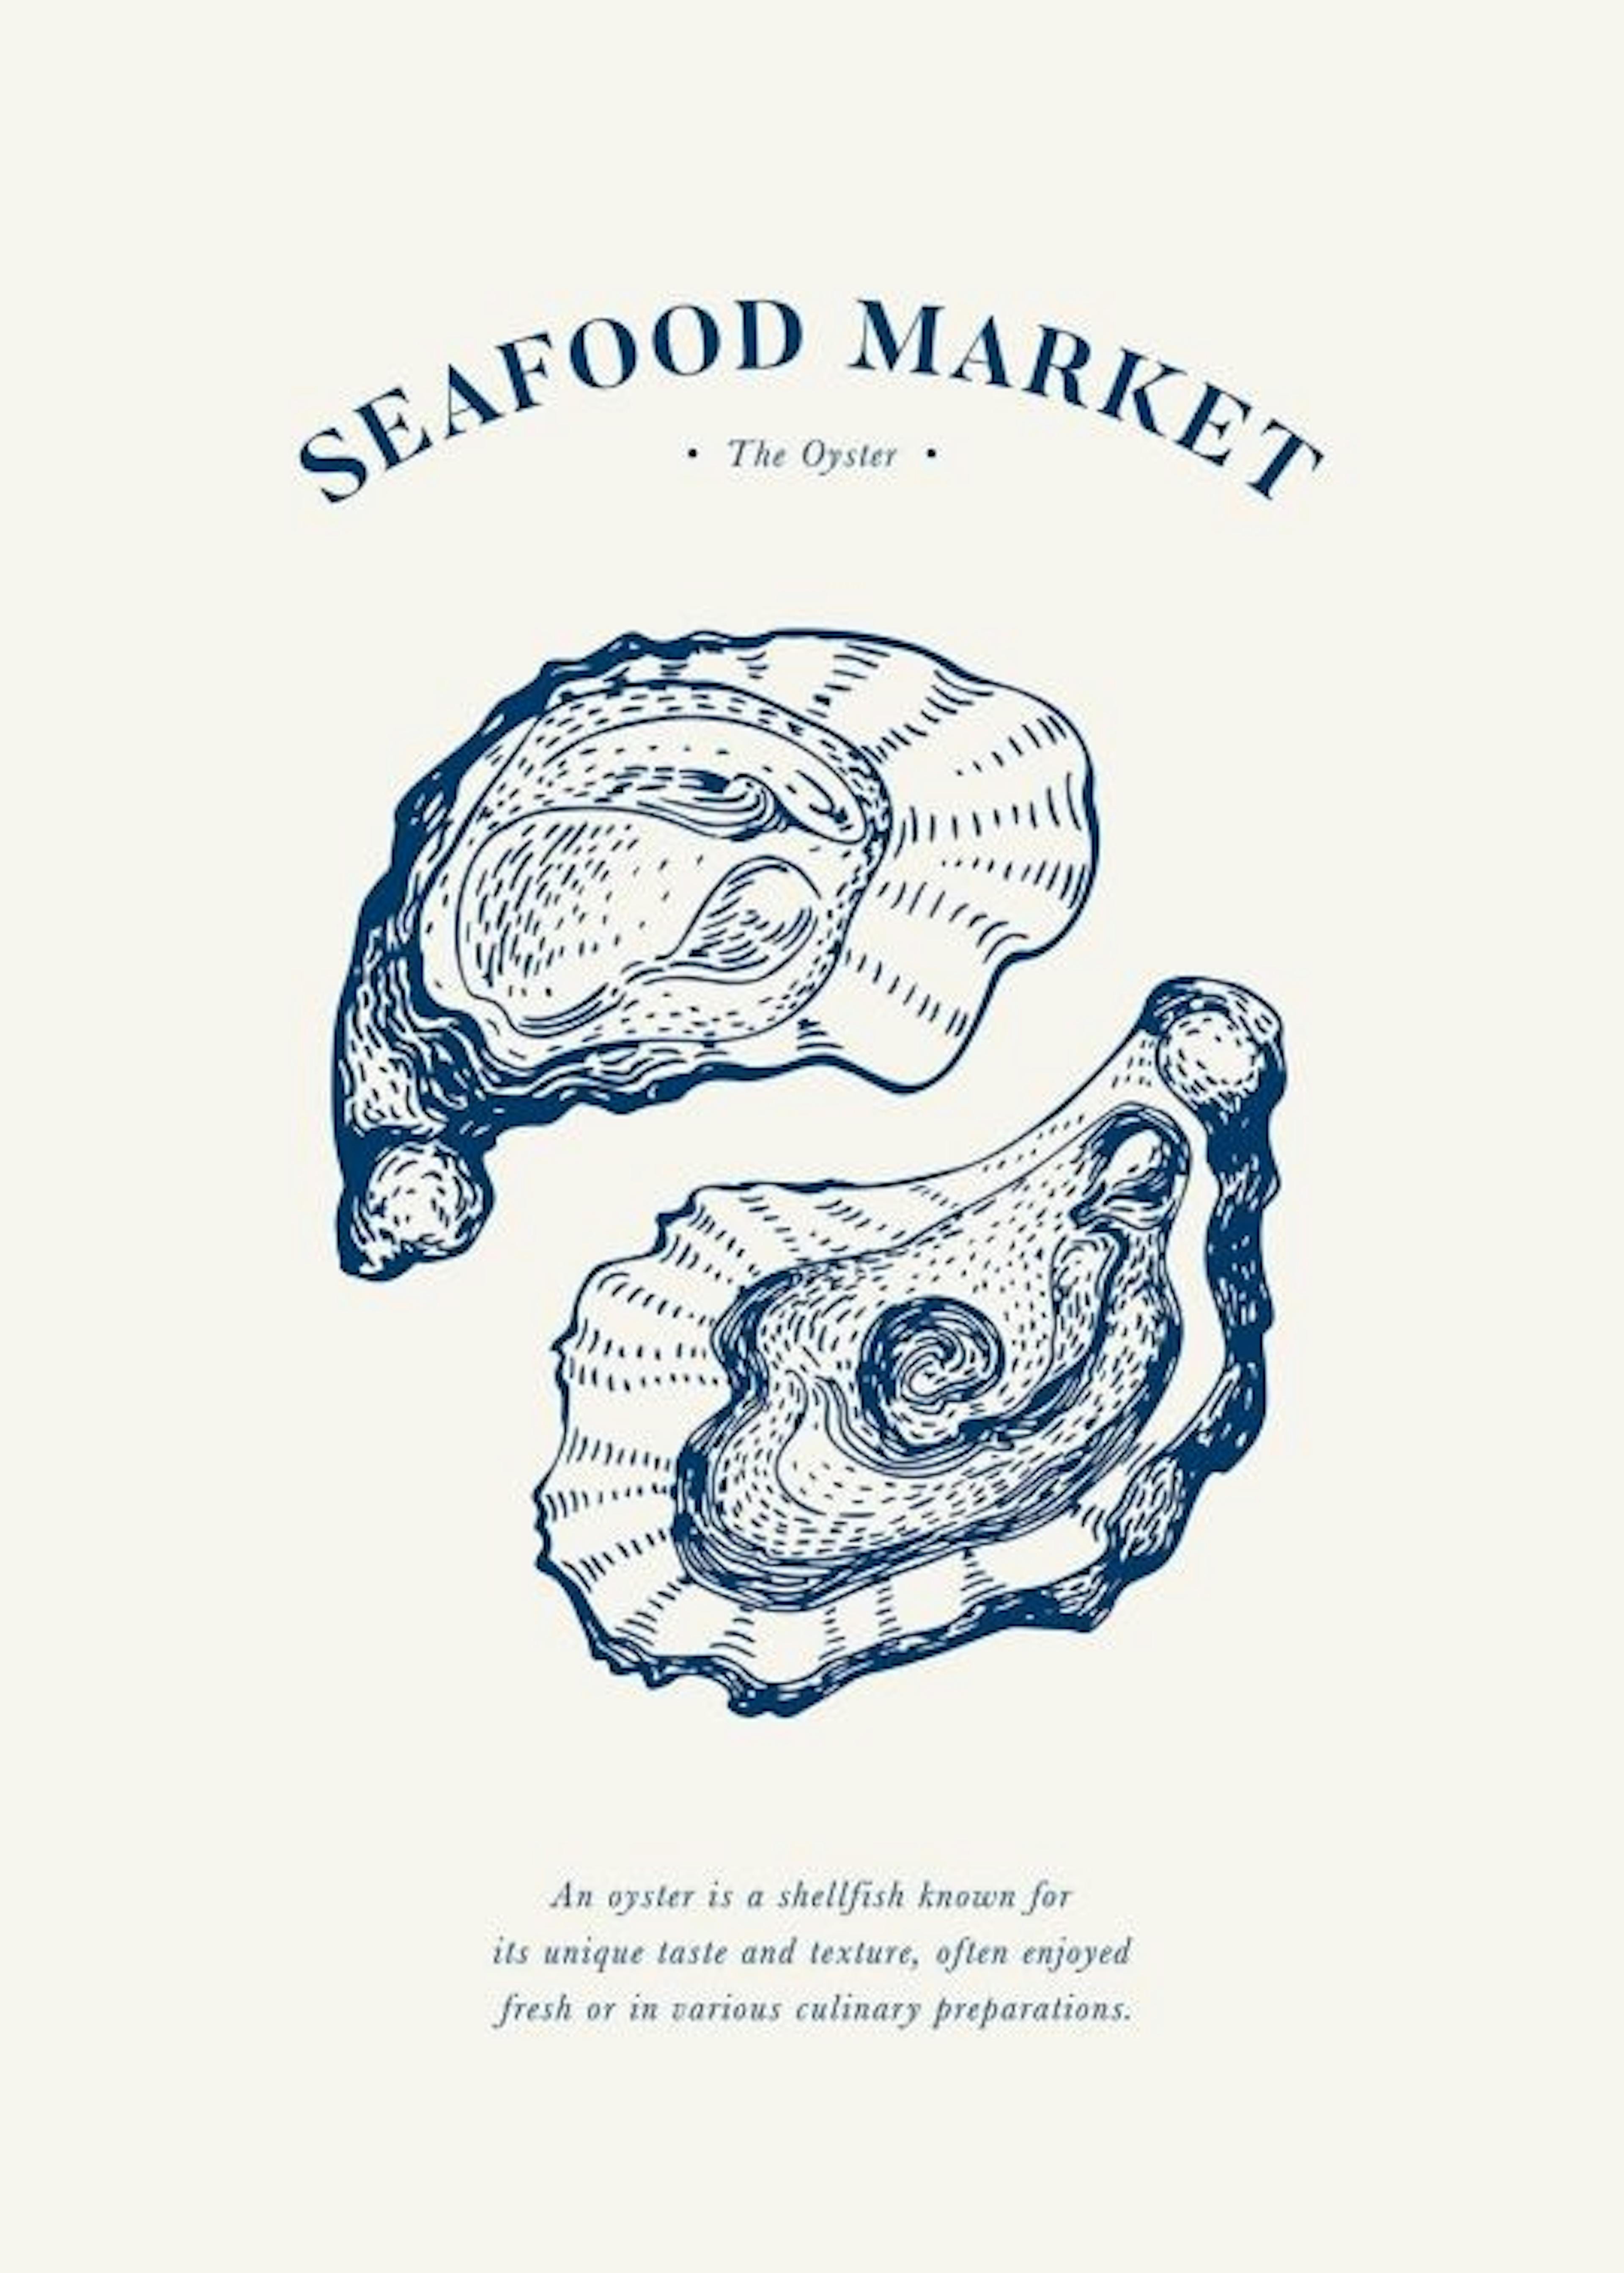 Seafood Market - The Oyster Affiche 0